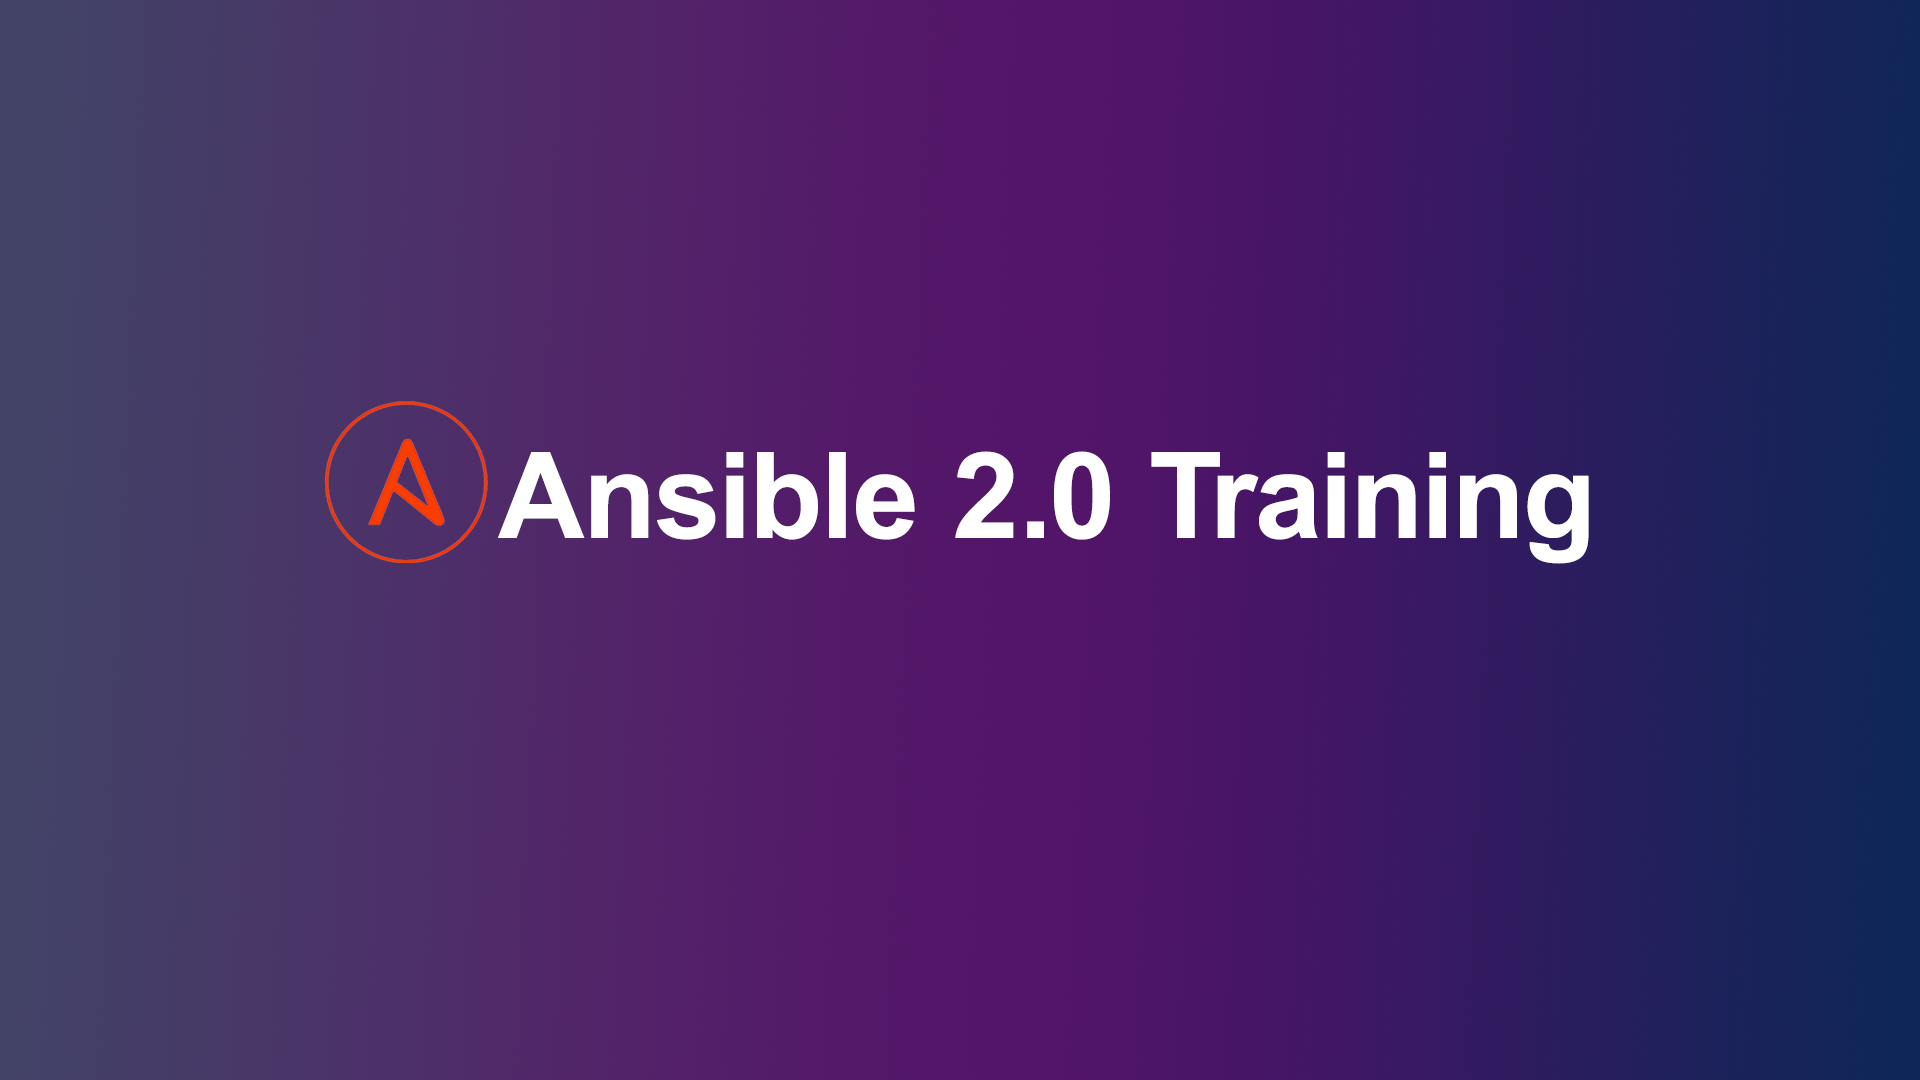 Ansible 2.0 Training Course